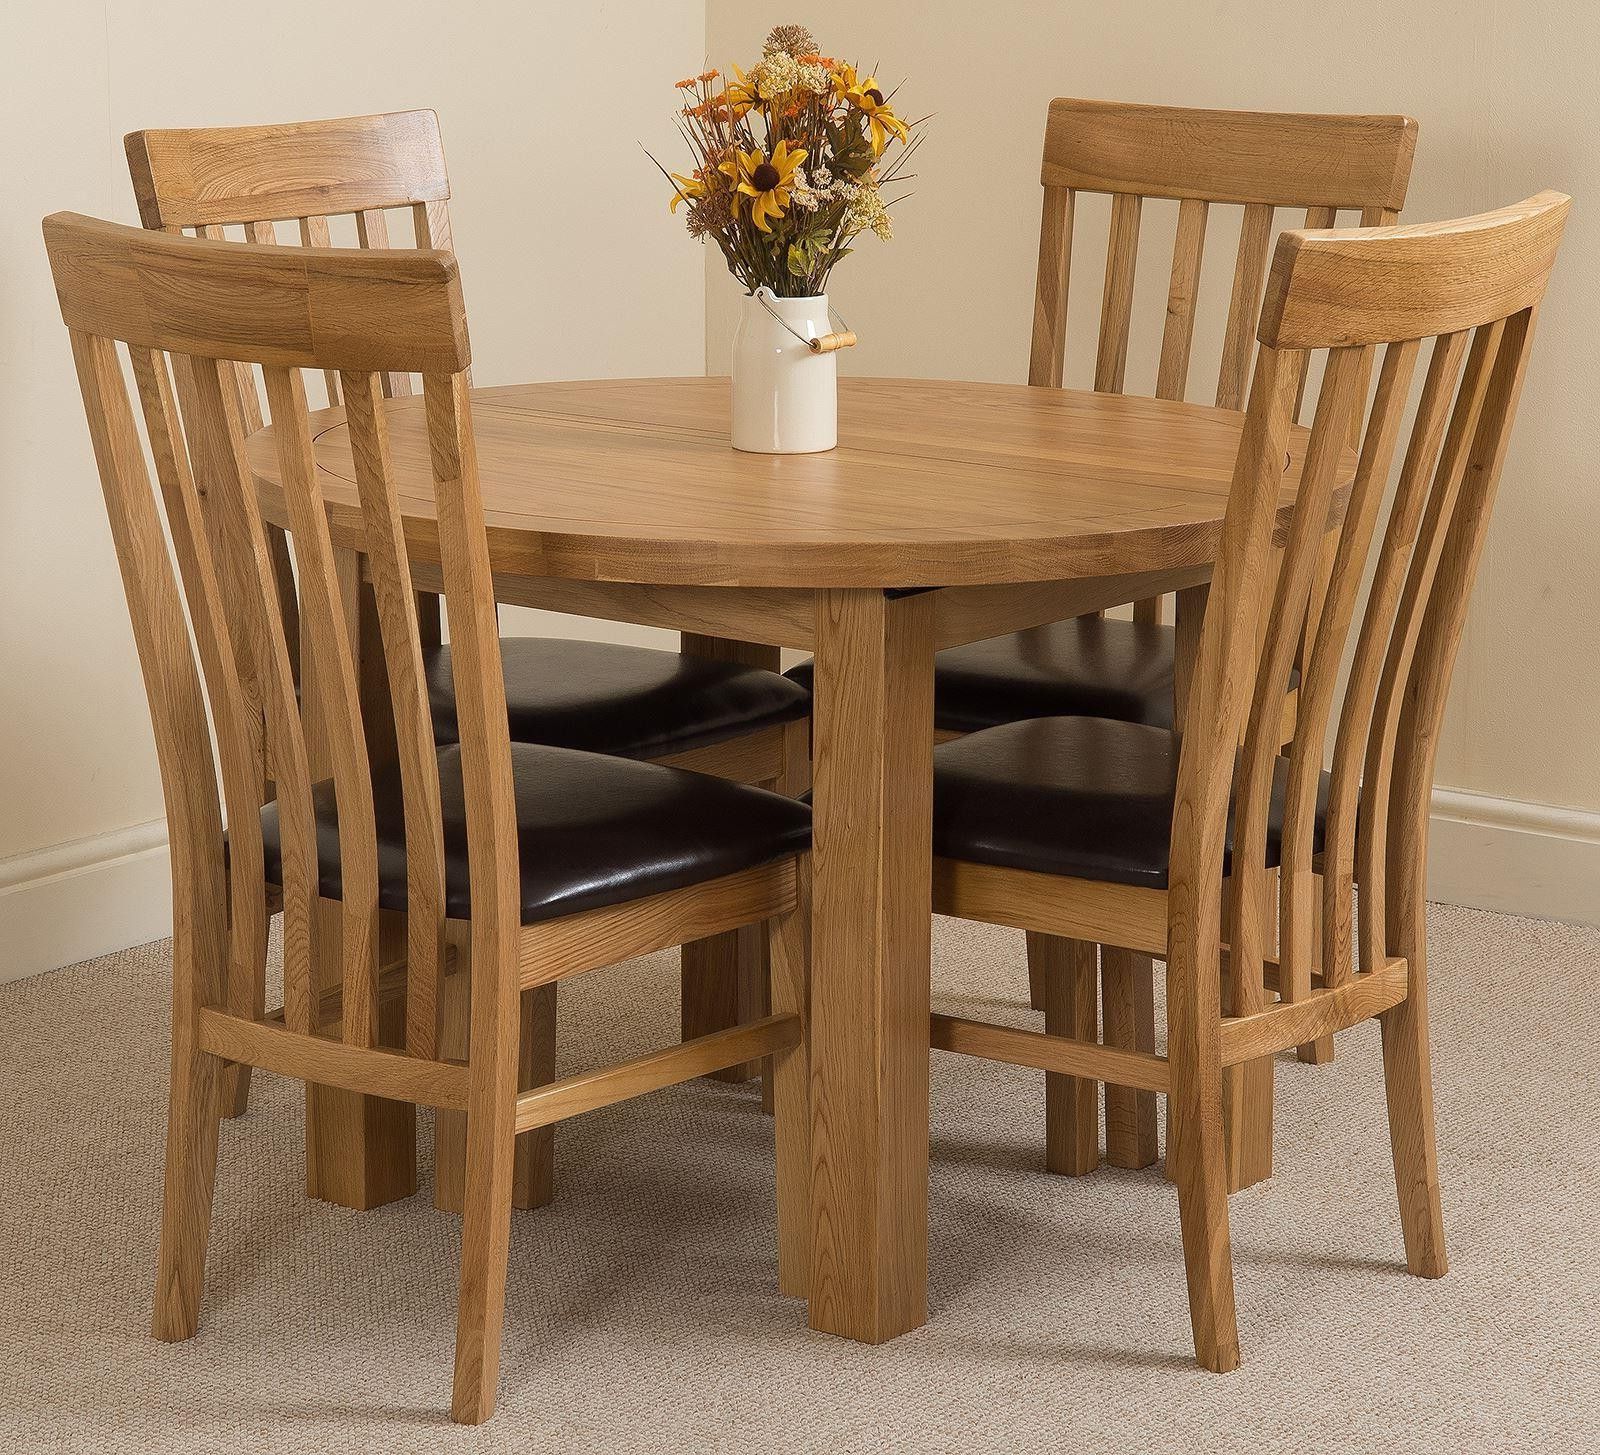 Edmonton Solid Oak Extending Oval Dining Table With 4 With Regard To Well Liked Light Brown Dining Tables (View 11 of 15)